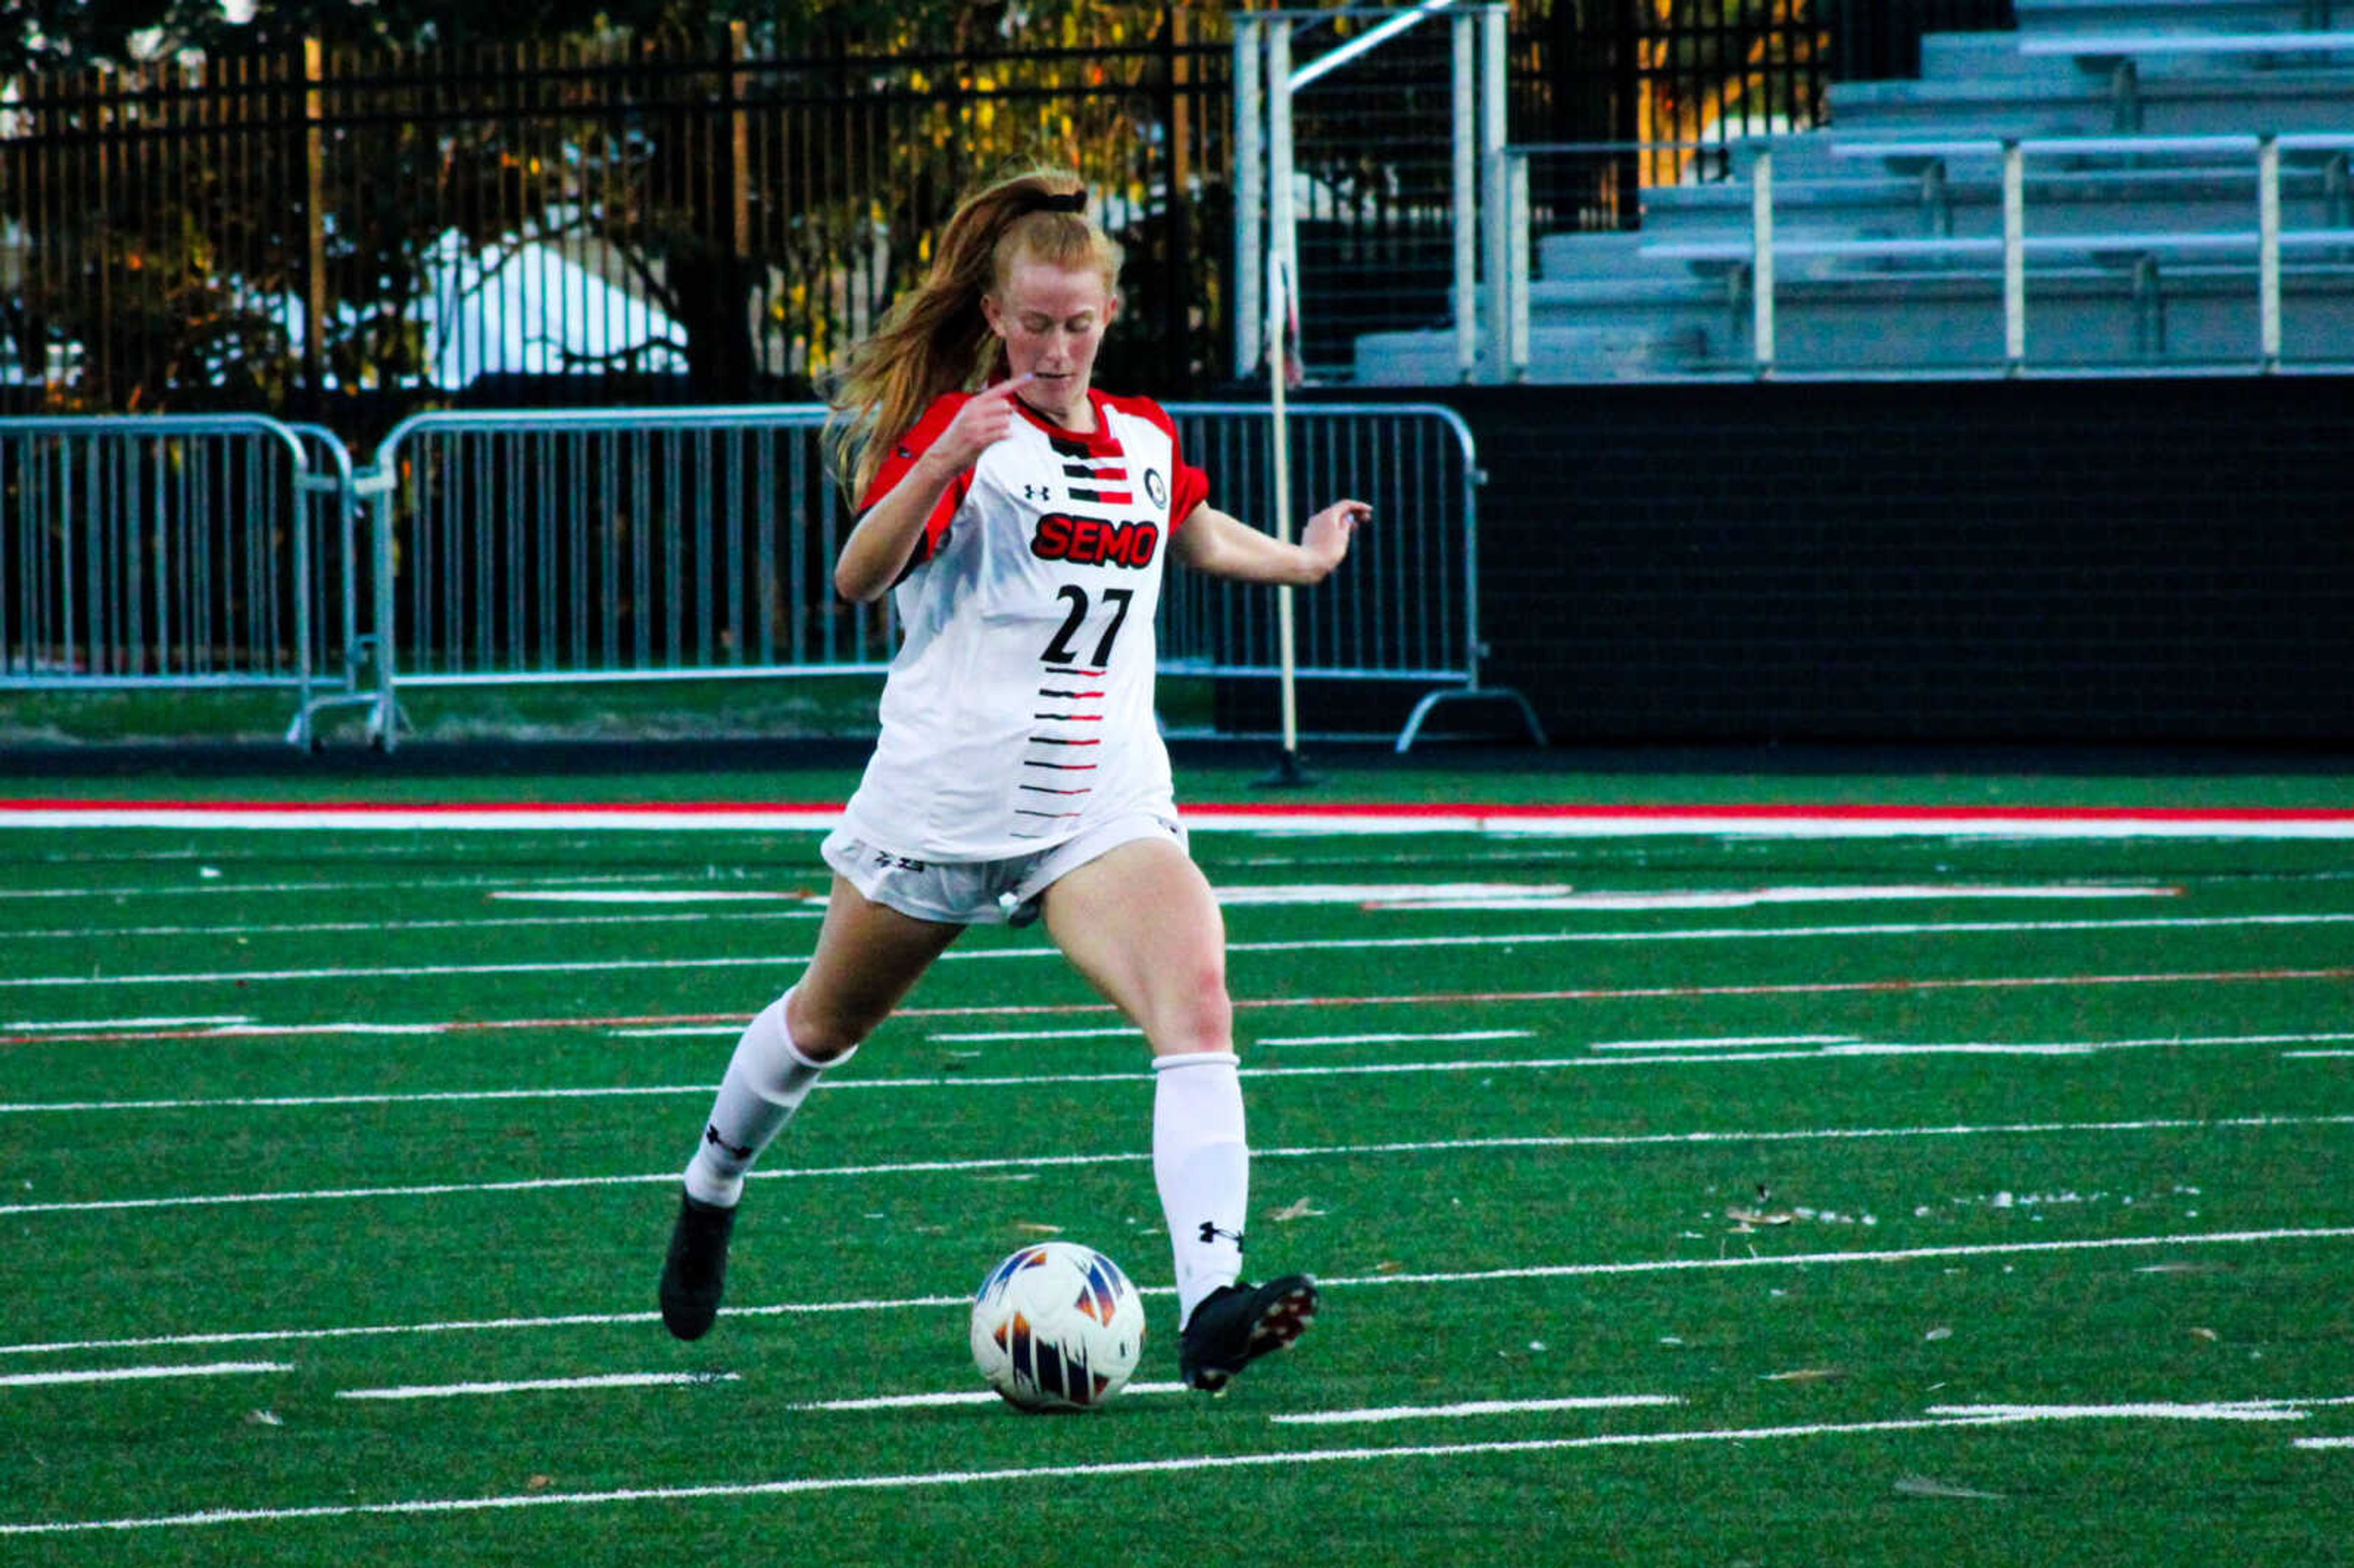 Graduate student Natalie Jackson prepares to pass to her teammate during SEMO's 1-0 victory over Columbia College on September 14 at Houck Stadium. Jackson helped The Redhawks keep a clean sheet, and win the game.